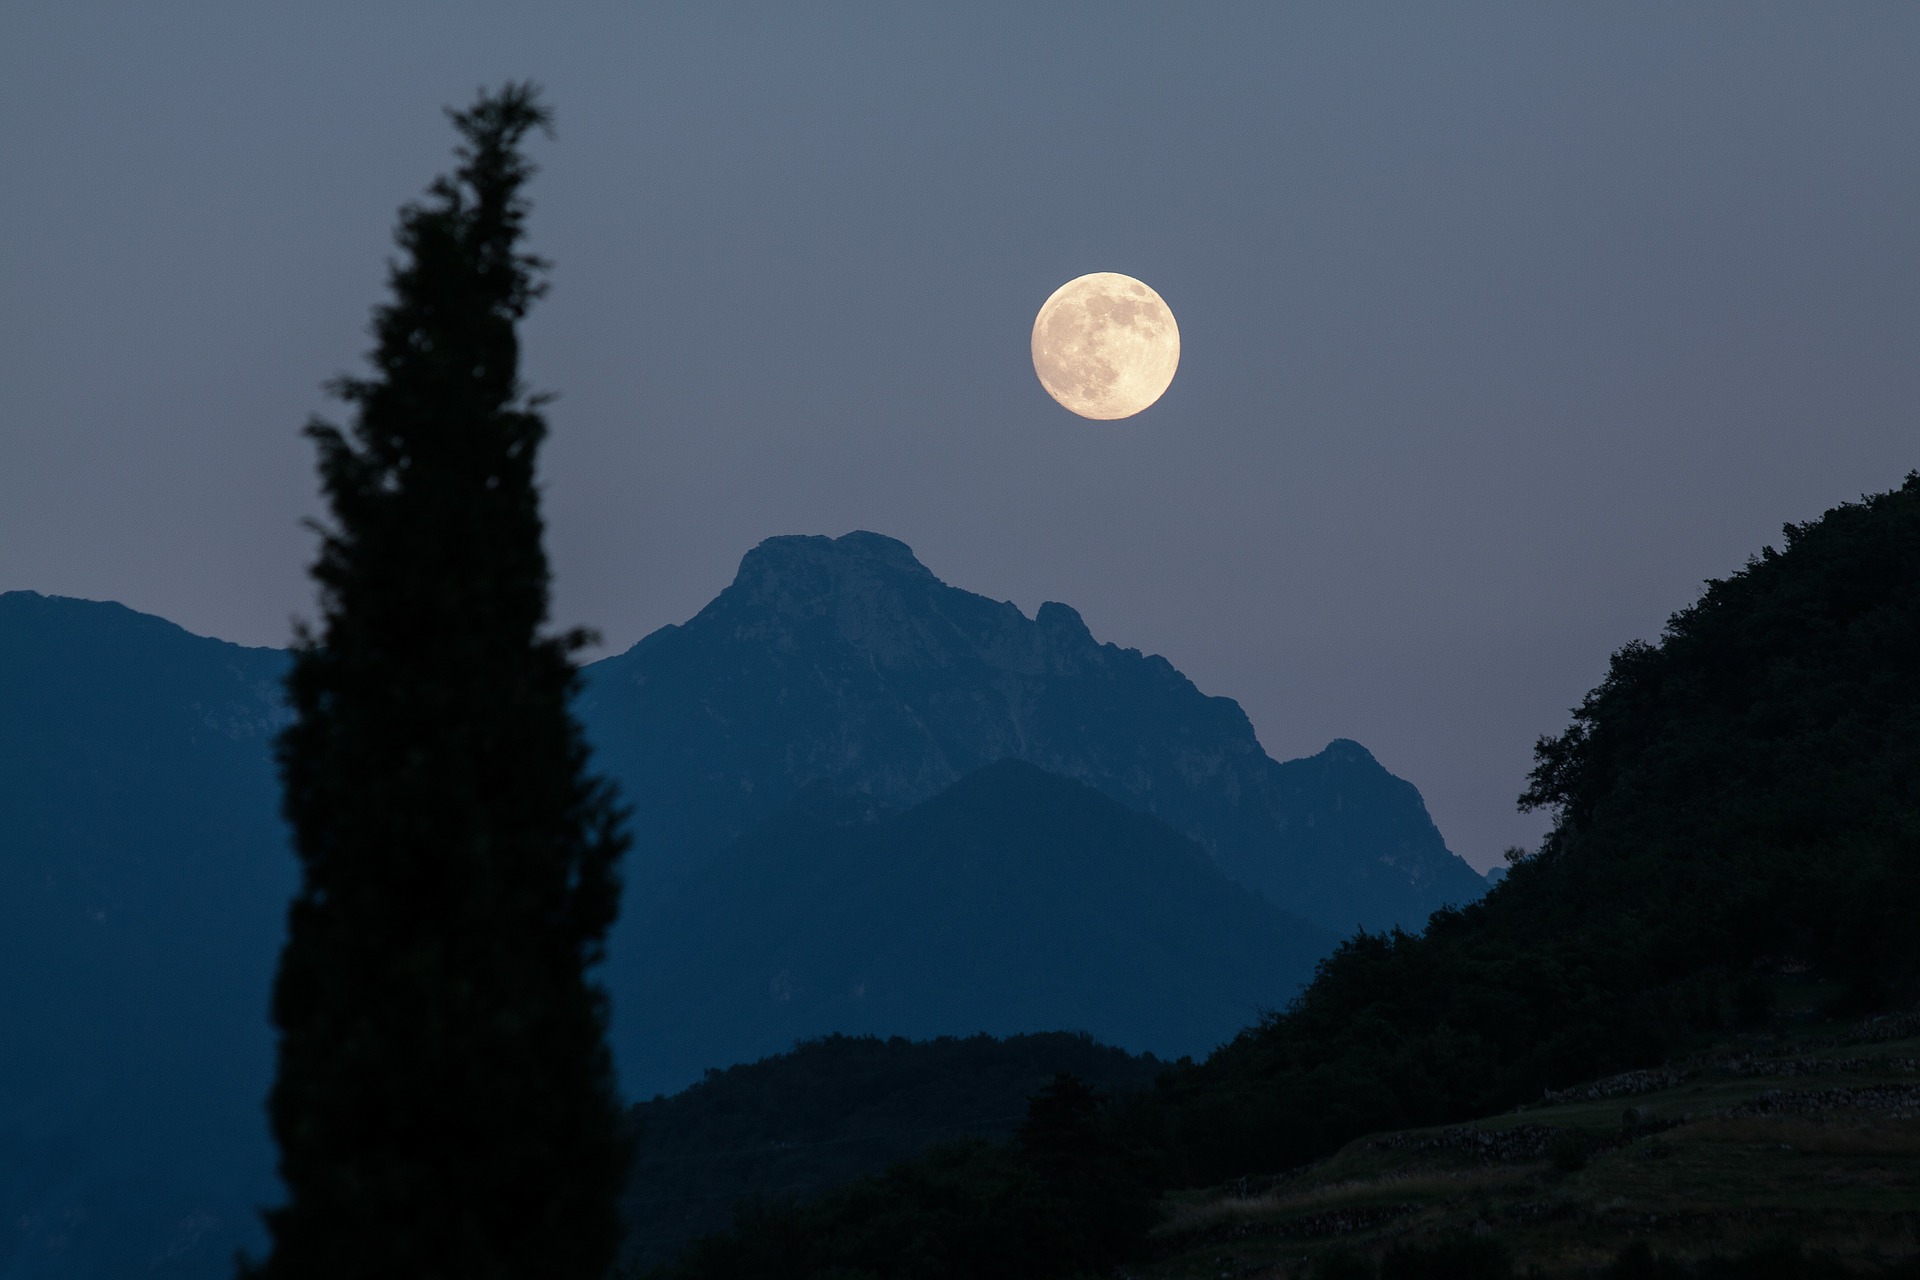 When Will the Moon Rise Tonight? Calculate Moonrise